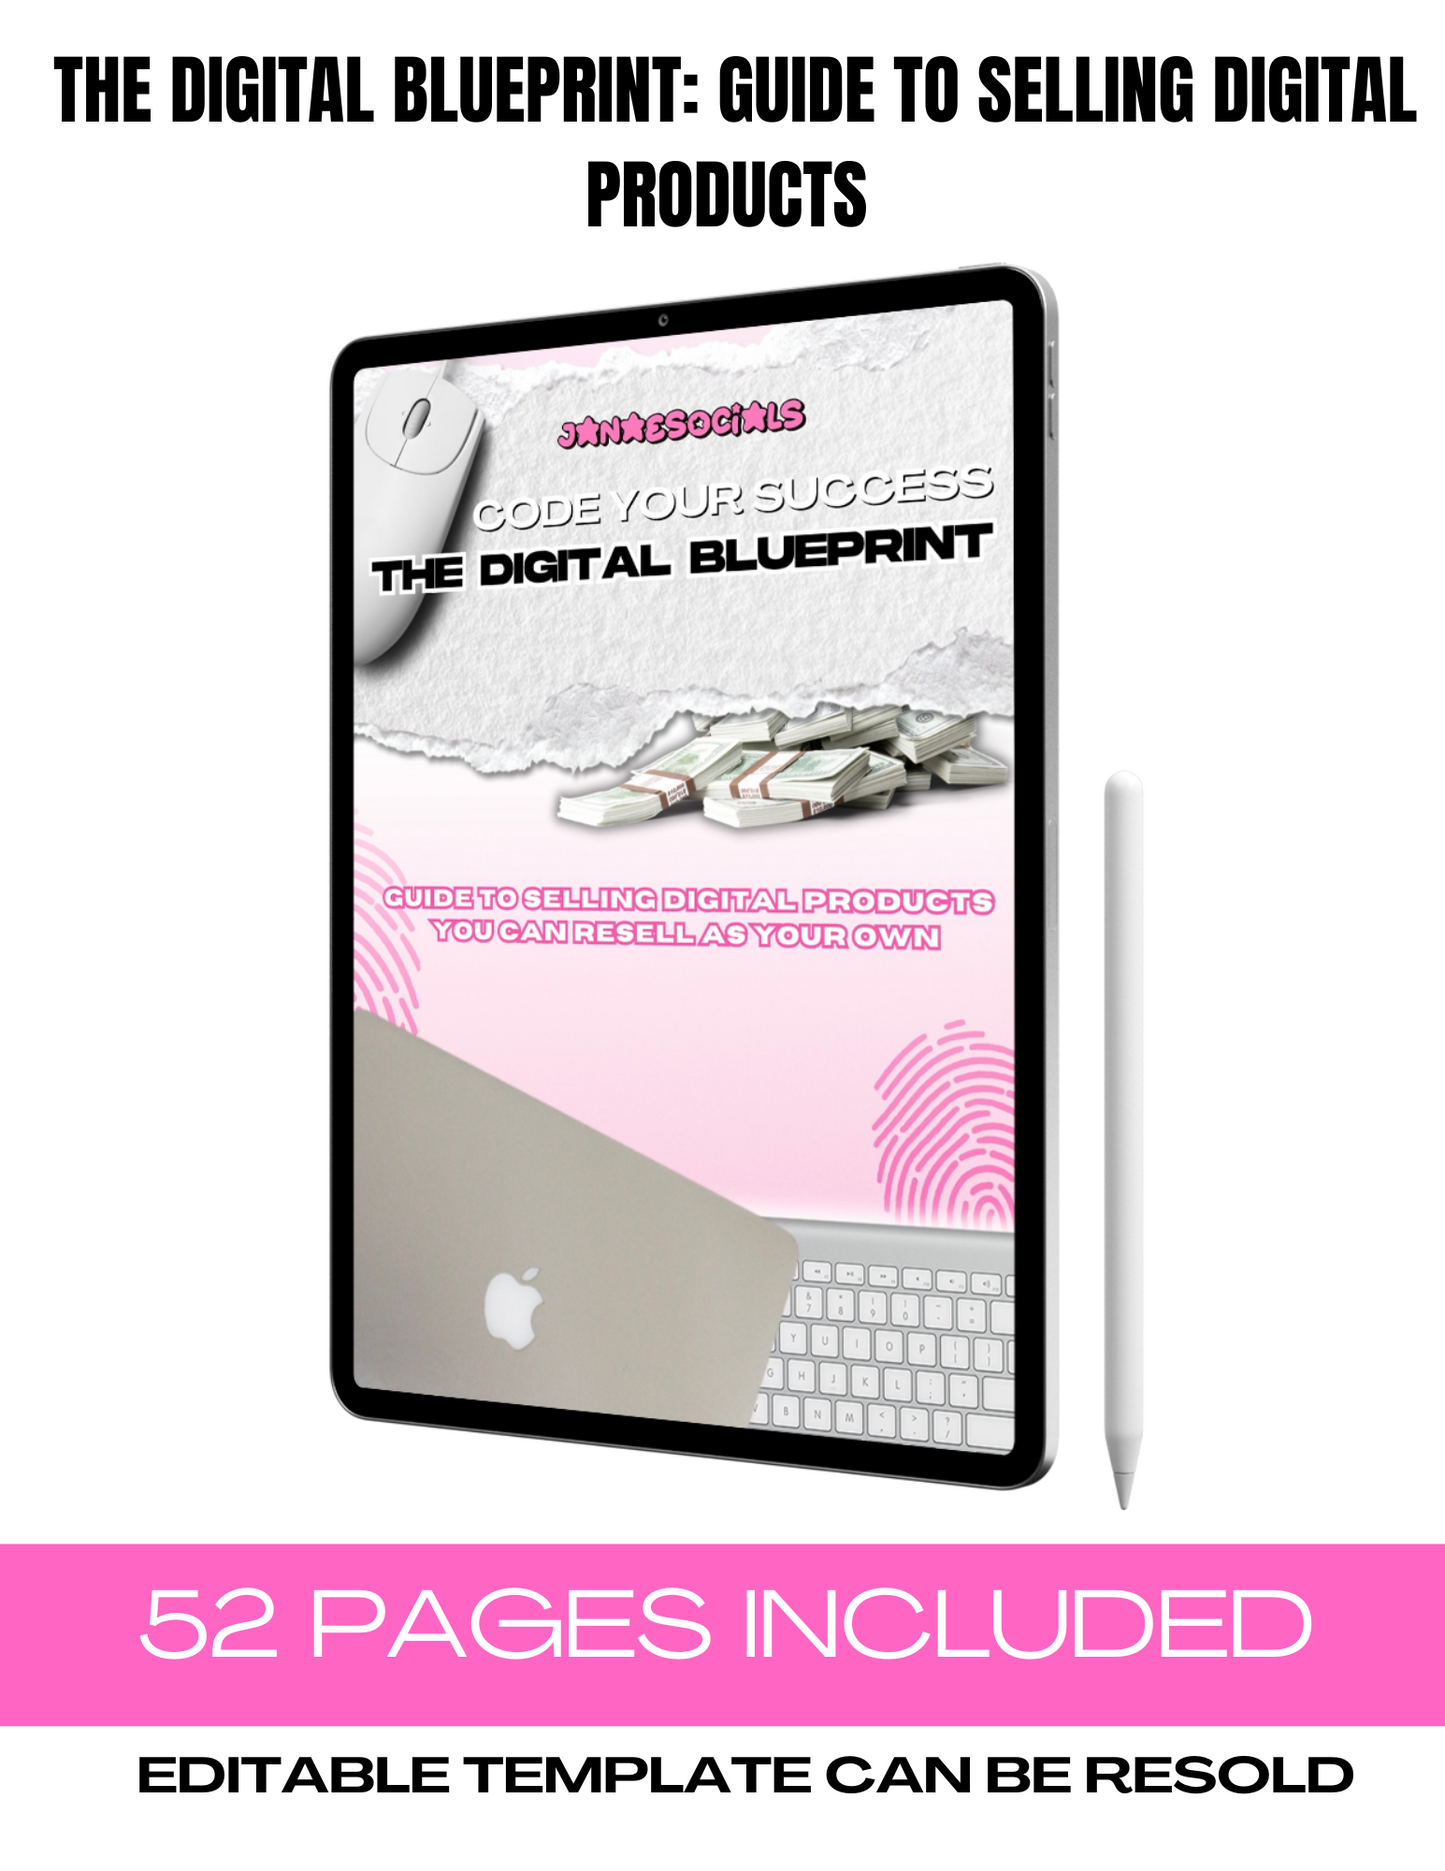 DFY Digital Blueprint : Guide to Selling Digital Products + Resell Rights